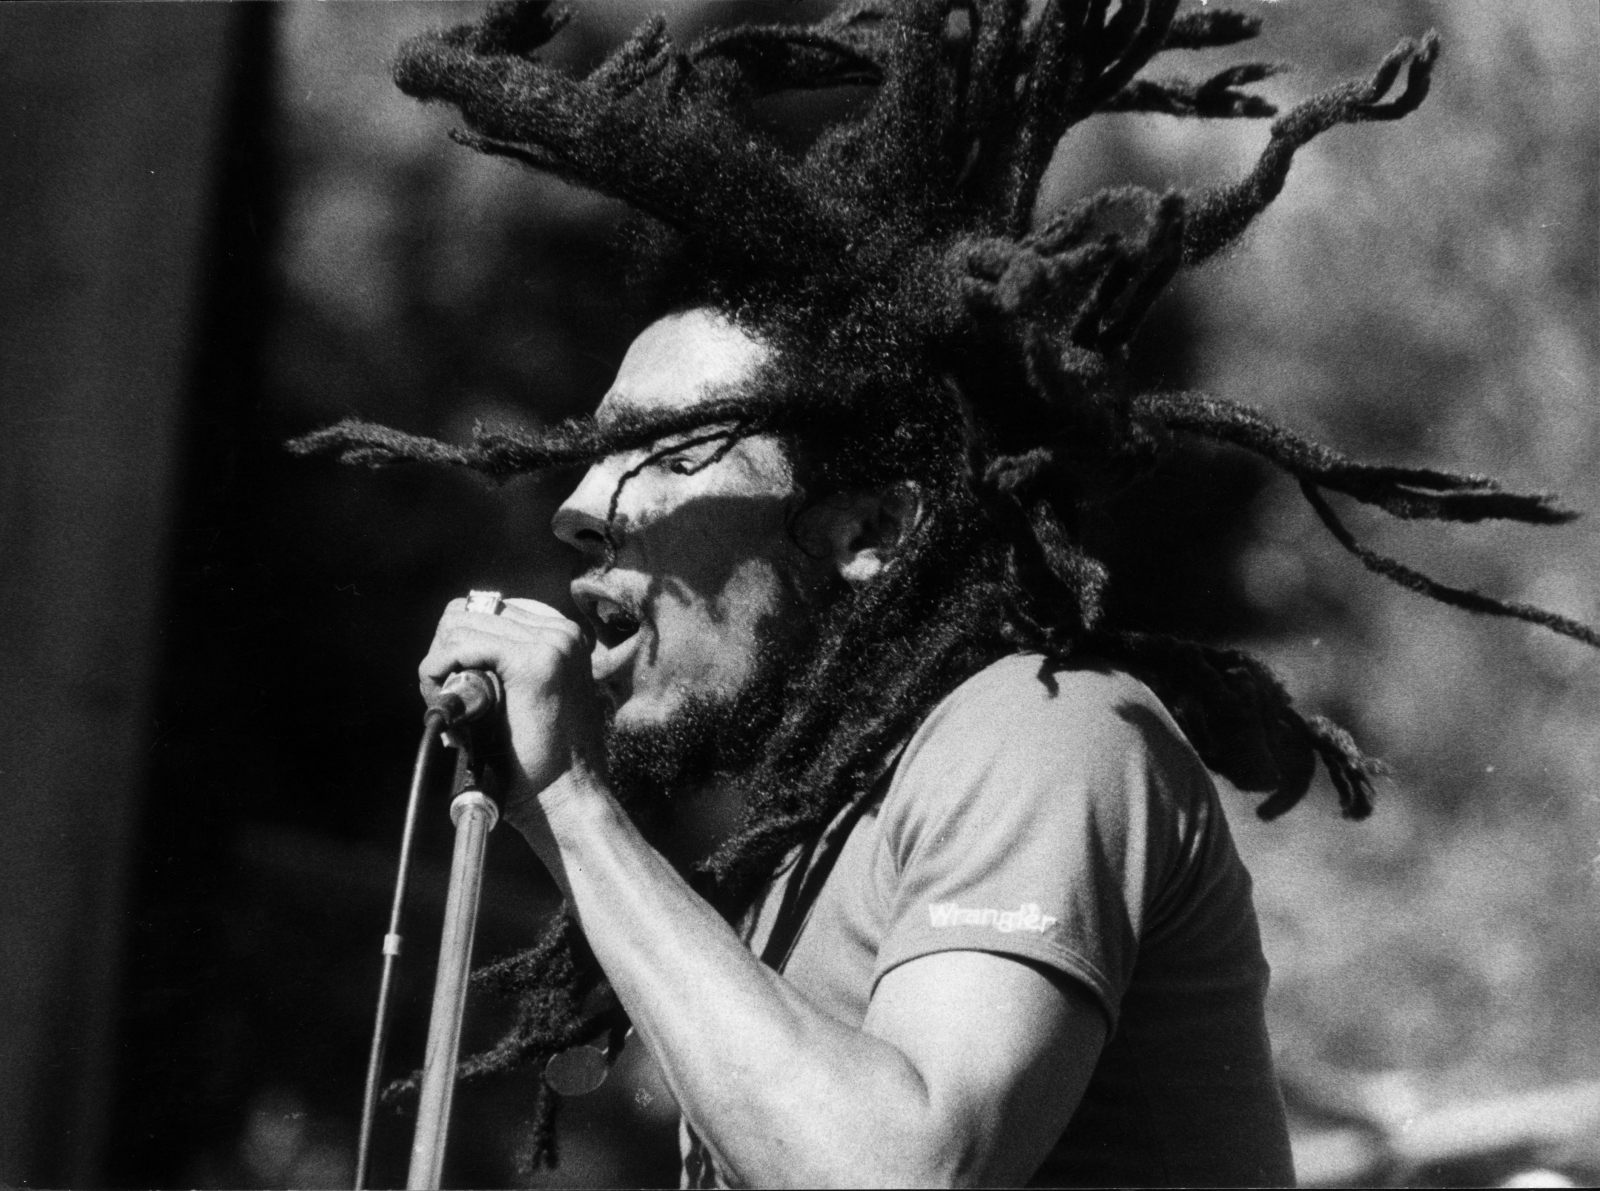 Bob Marley Day 2015: 10 facts about the global reggae icon on his 70th birthday1600 x 1191